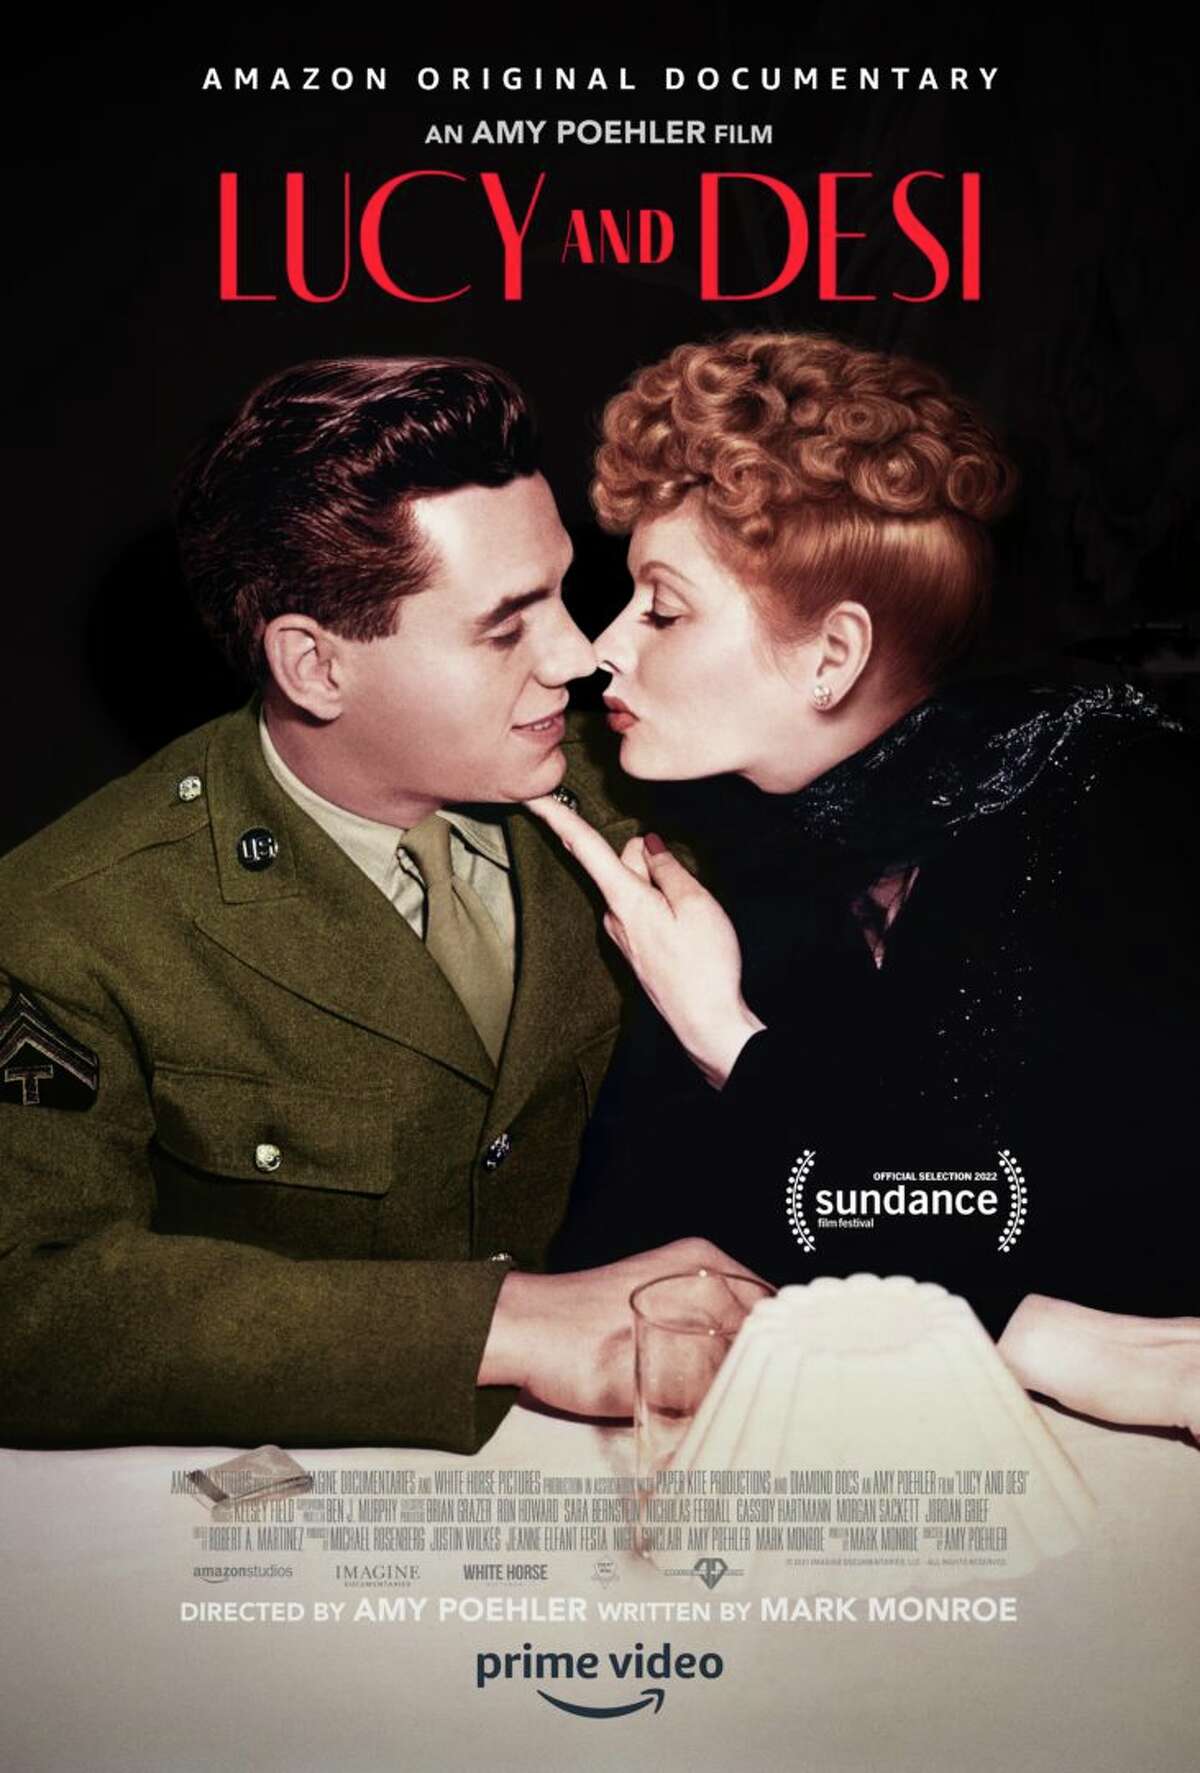 The poster for "Lucy and Desi."